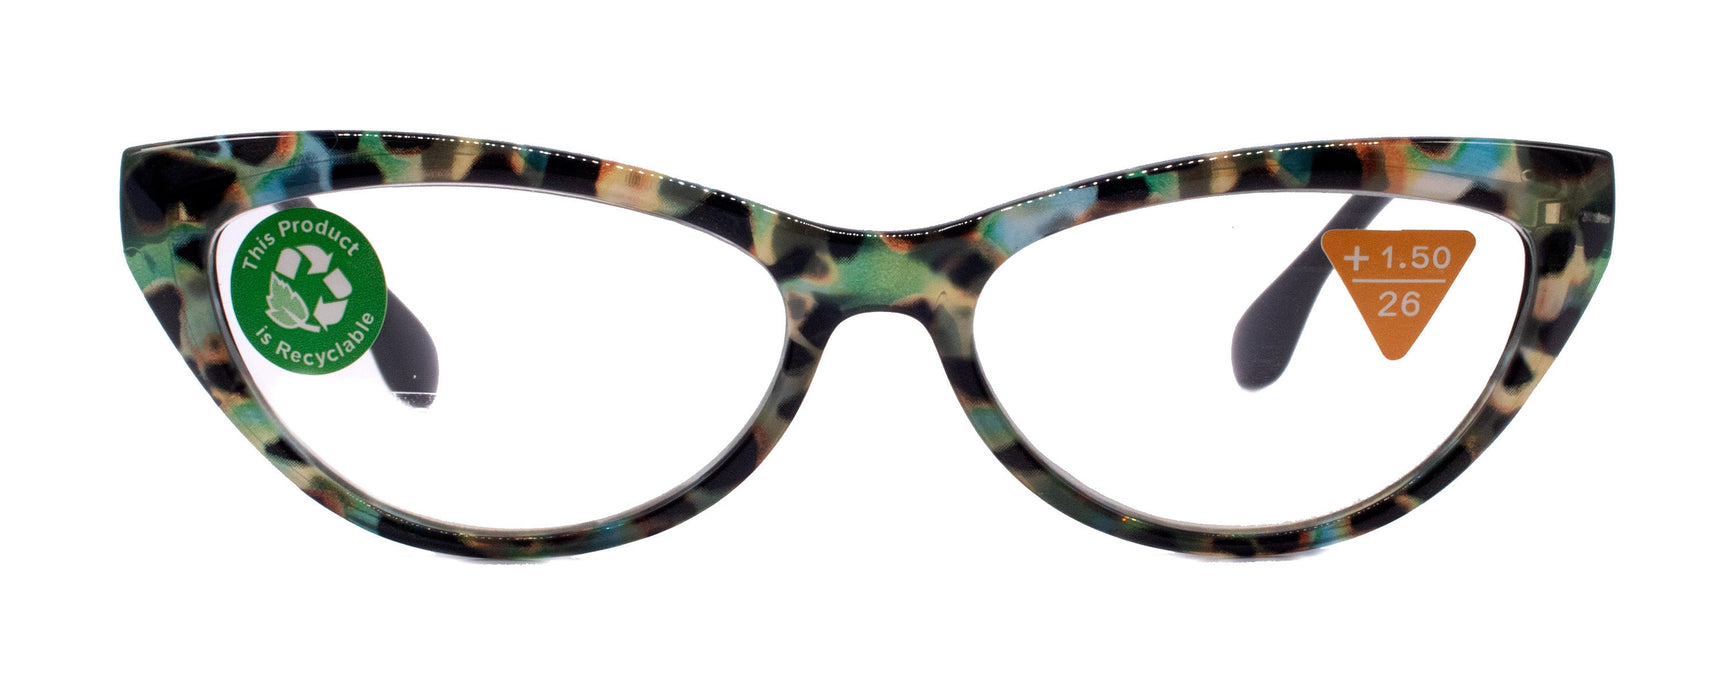 Lynx, (Premium) Reading Glass, High End Readers +1.25..+3 Magnifying, Cat Eye optical Frame, Tortoise Shell (Brown, Green) NY Fifth Avenue